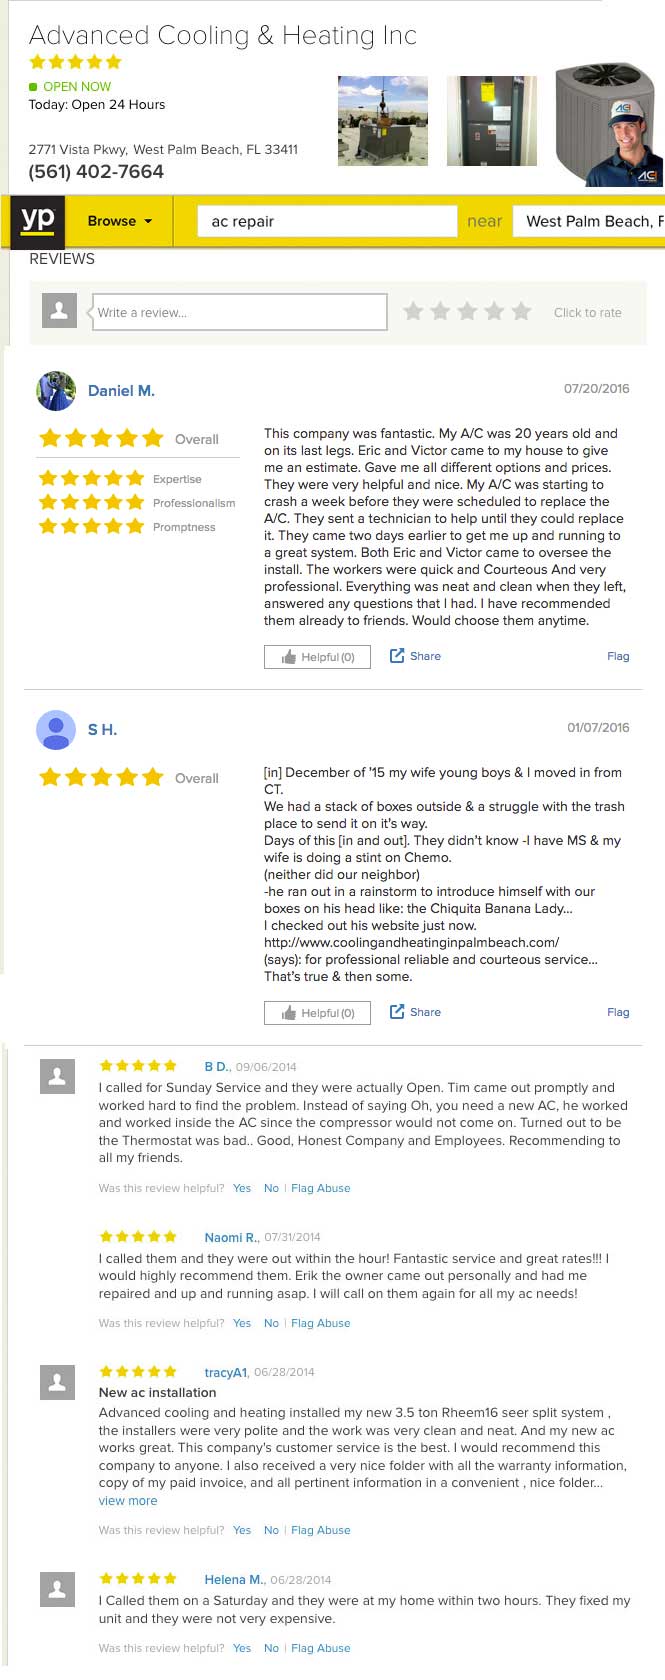 yellowpages-reviews-ach